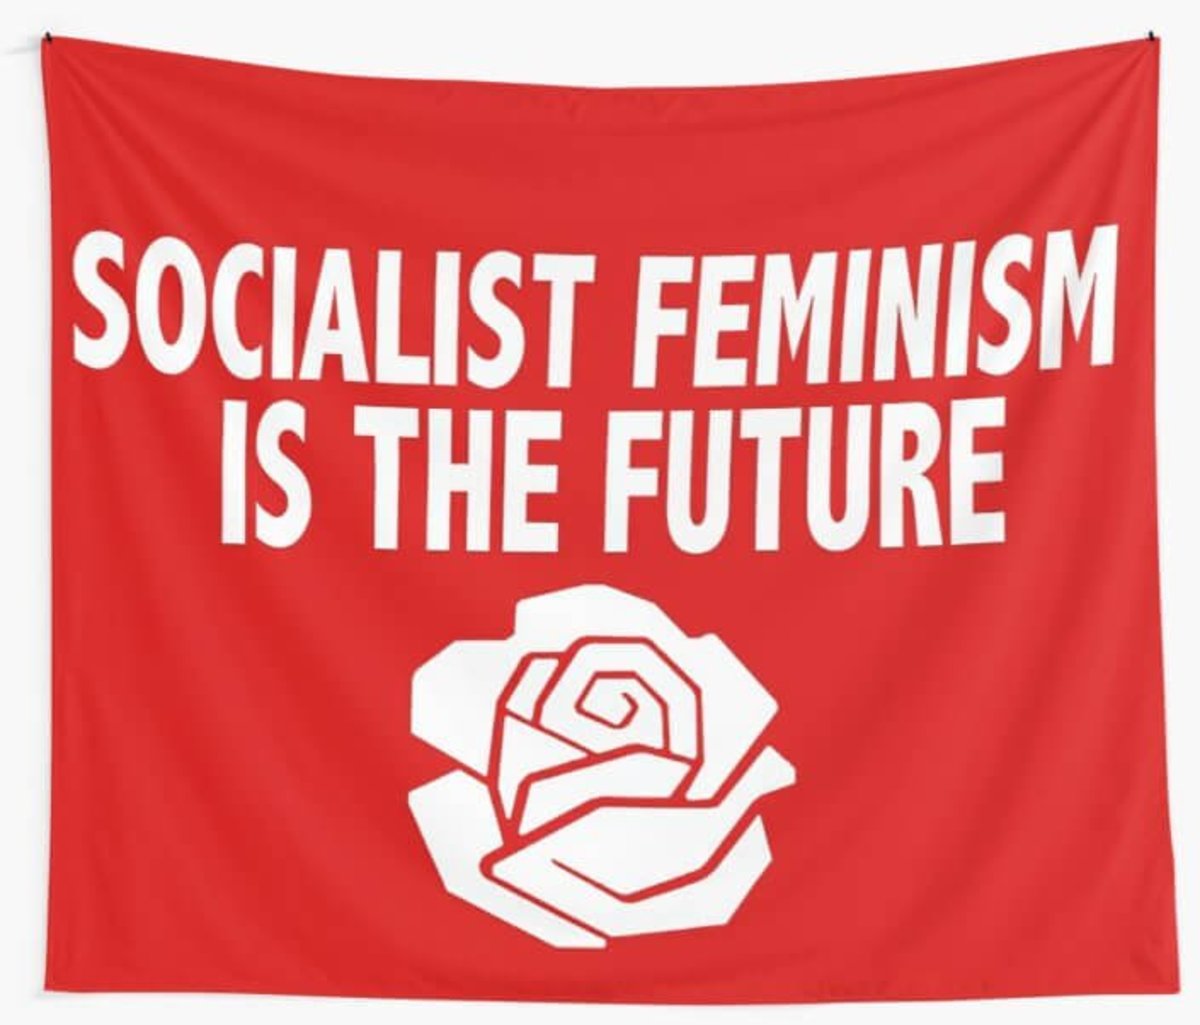 What Is Socialist Feminism